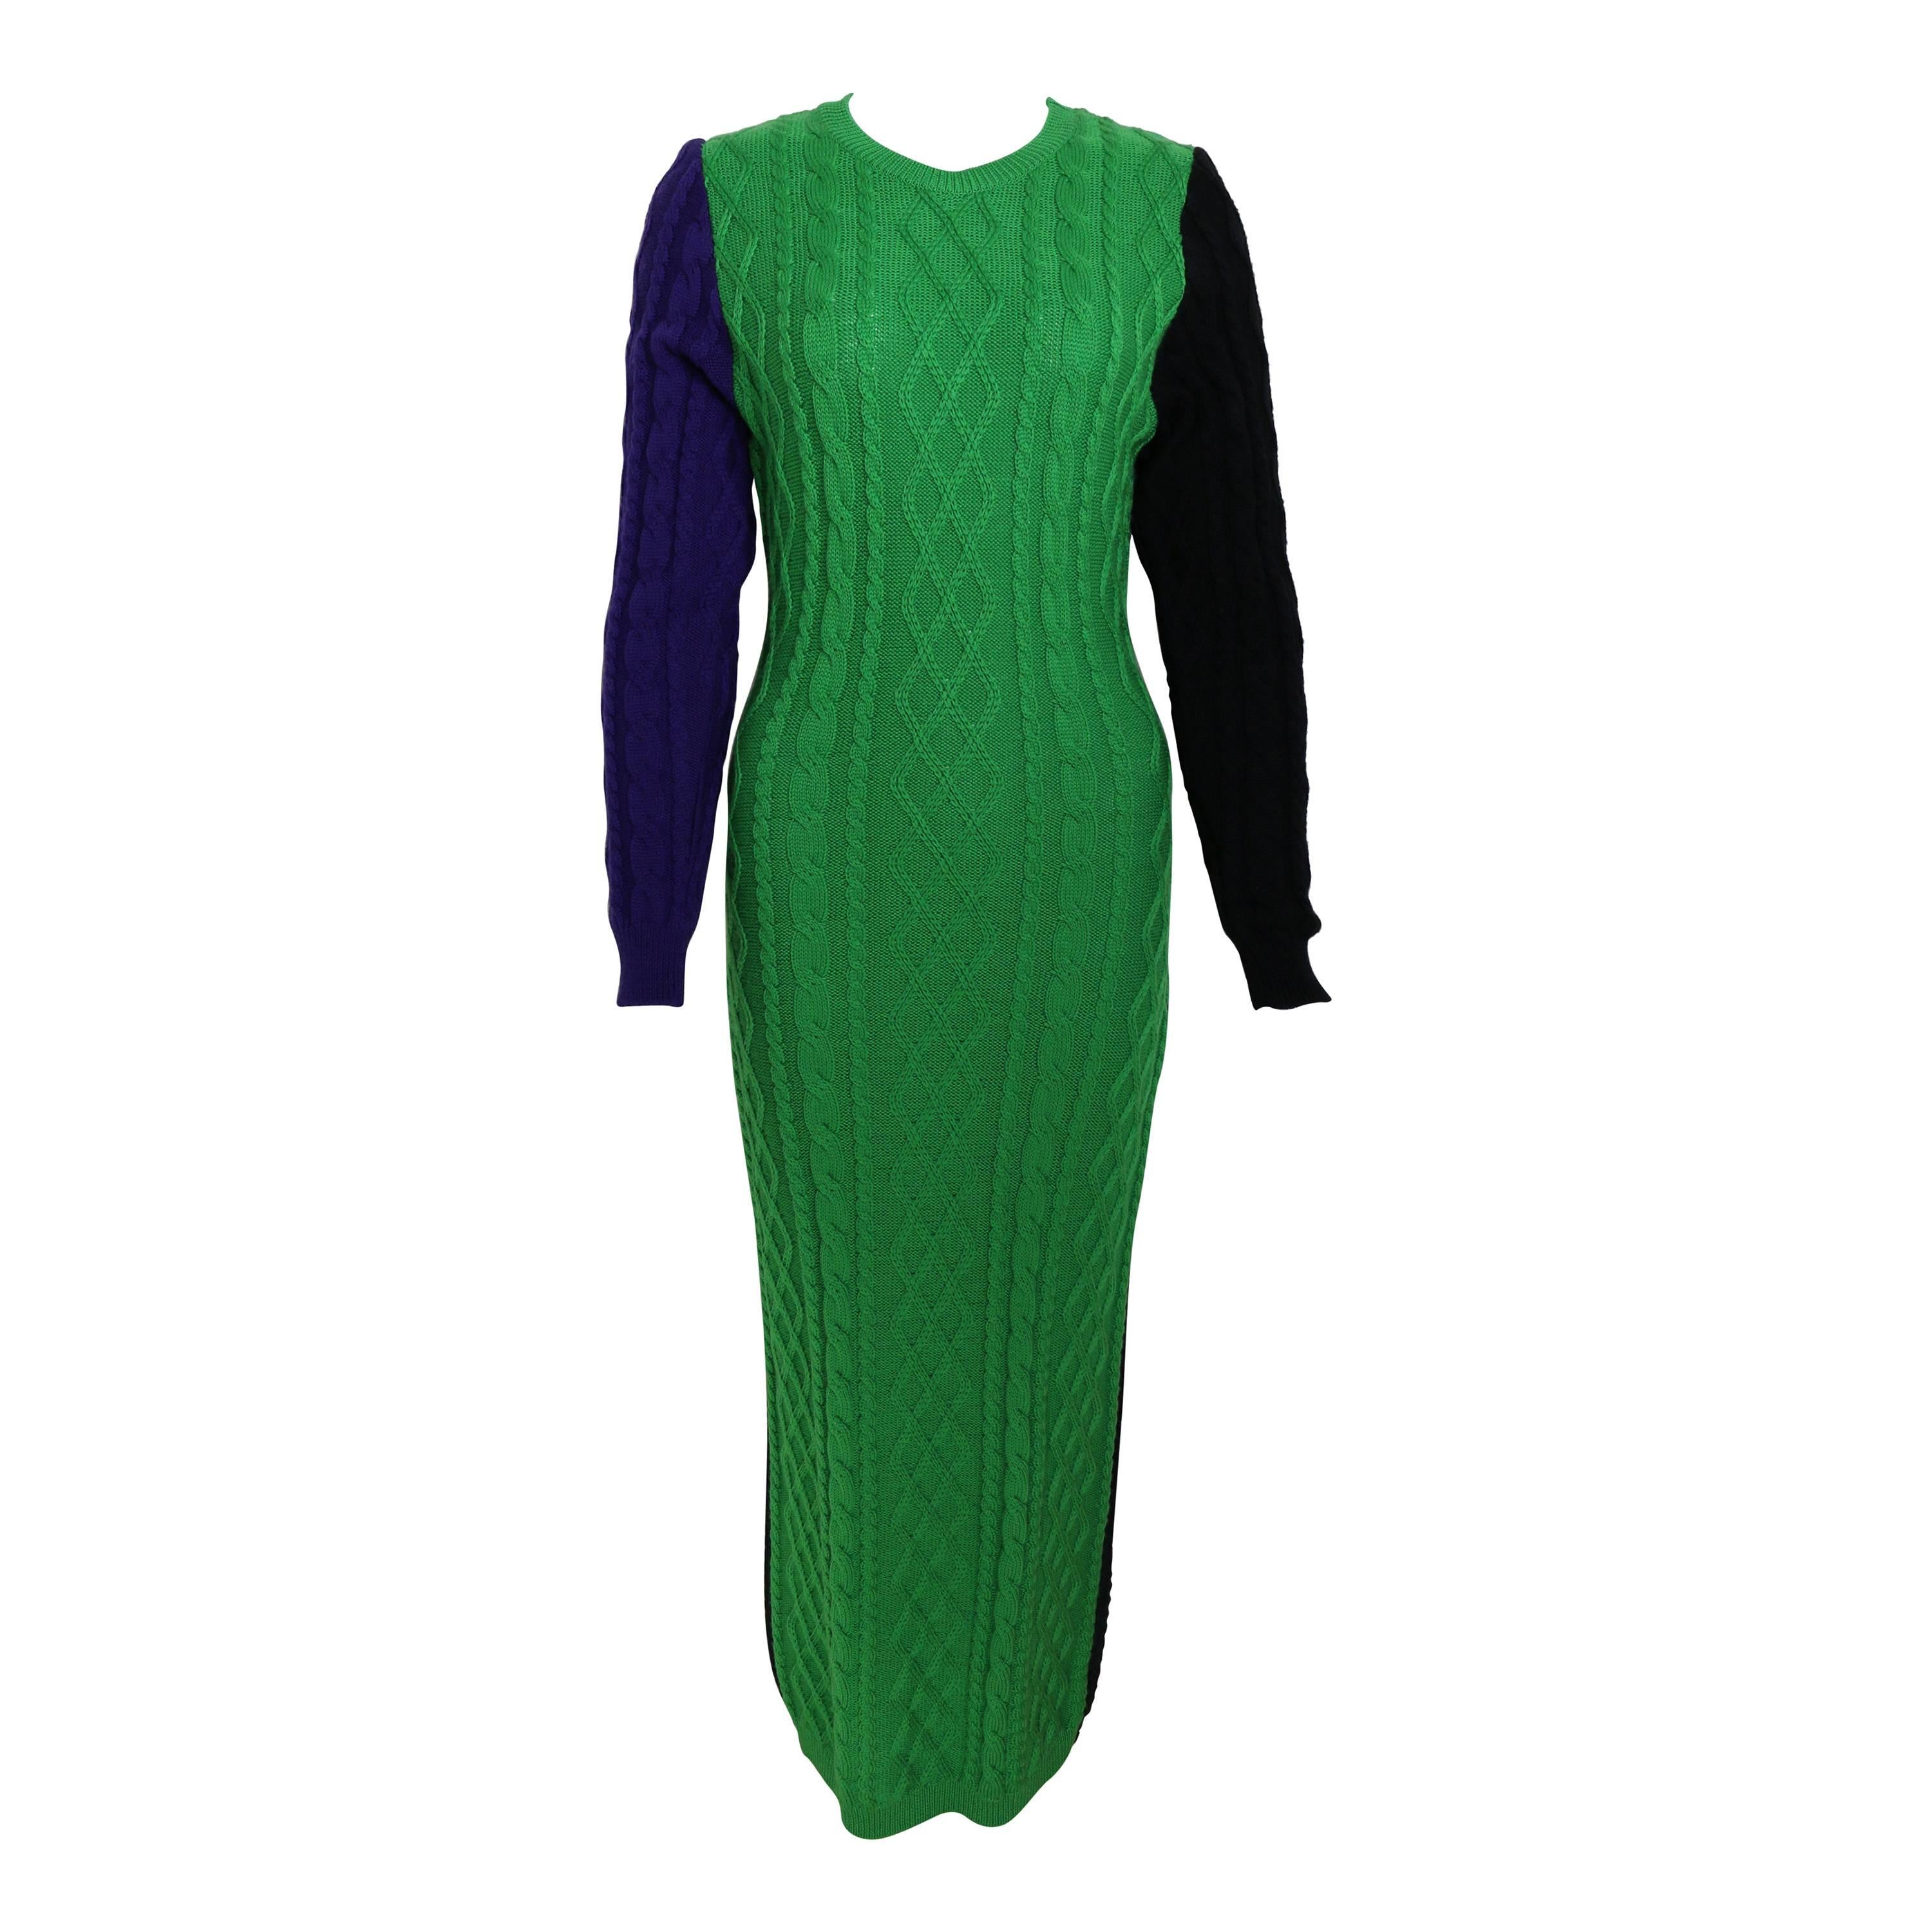 90s Versus By Gianni Versace Colour-Blocked Knitted Maxi Dress